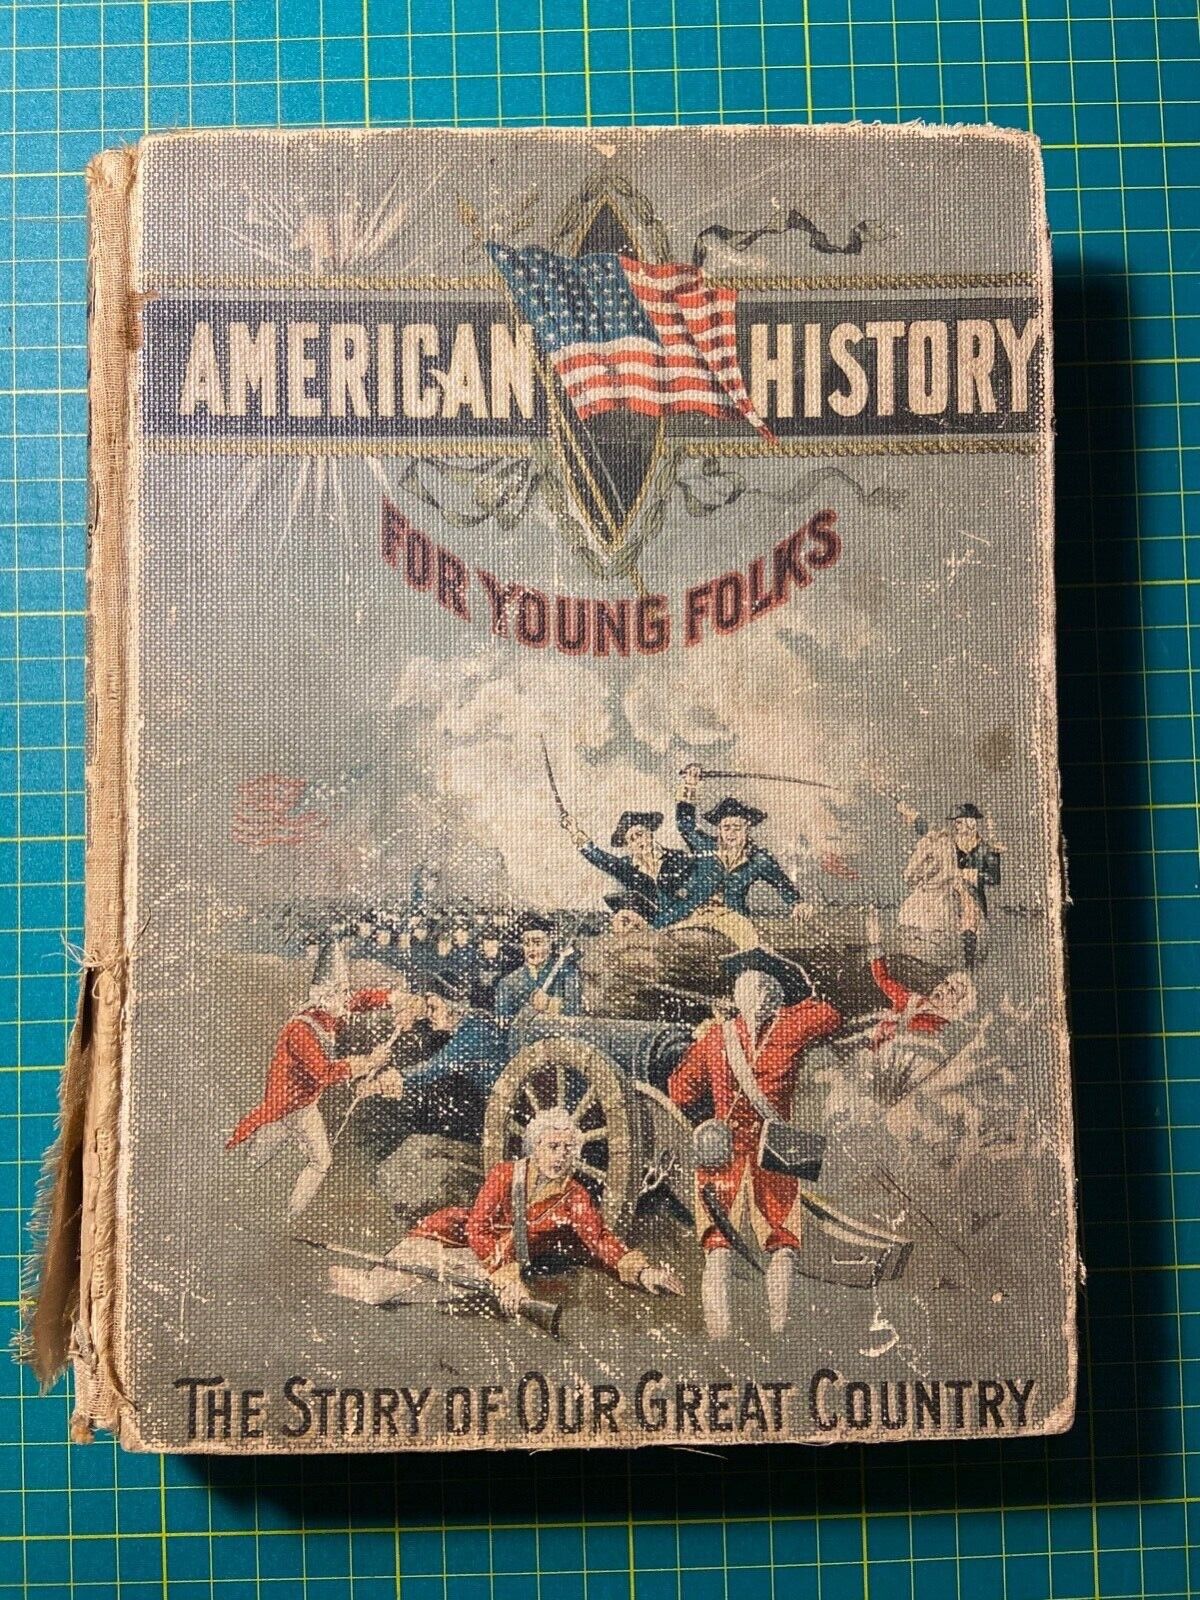 Rare Antique Book American History for Young Folks 1898 Henry Davenport Northrop